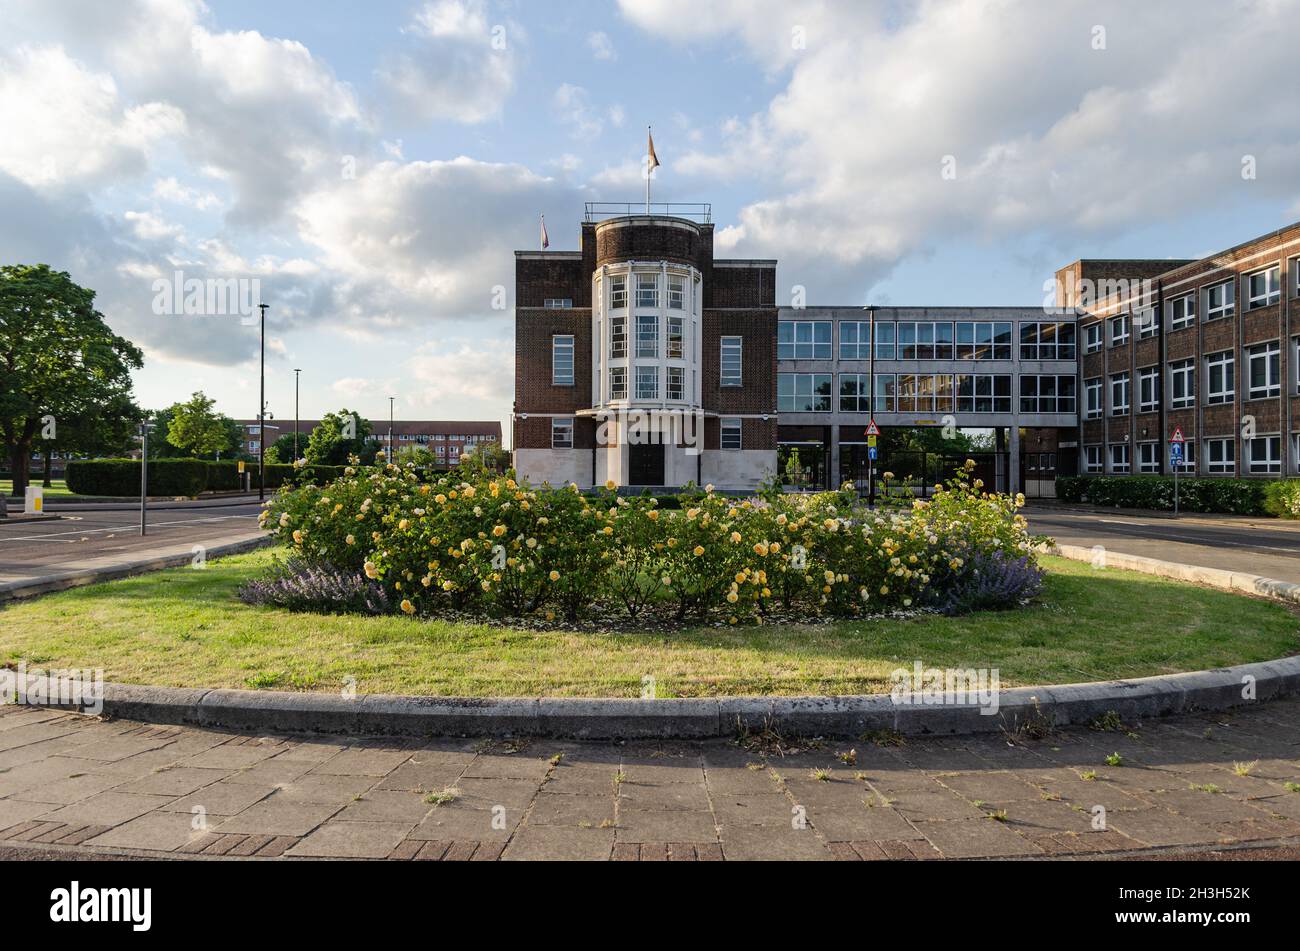 The CU Building And Grounds In Dagenham, East London, UK Stock Photo